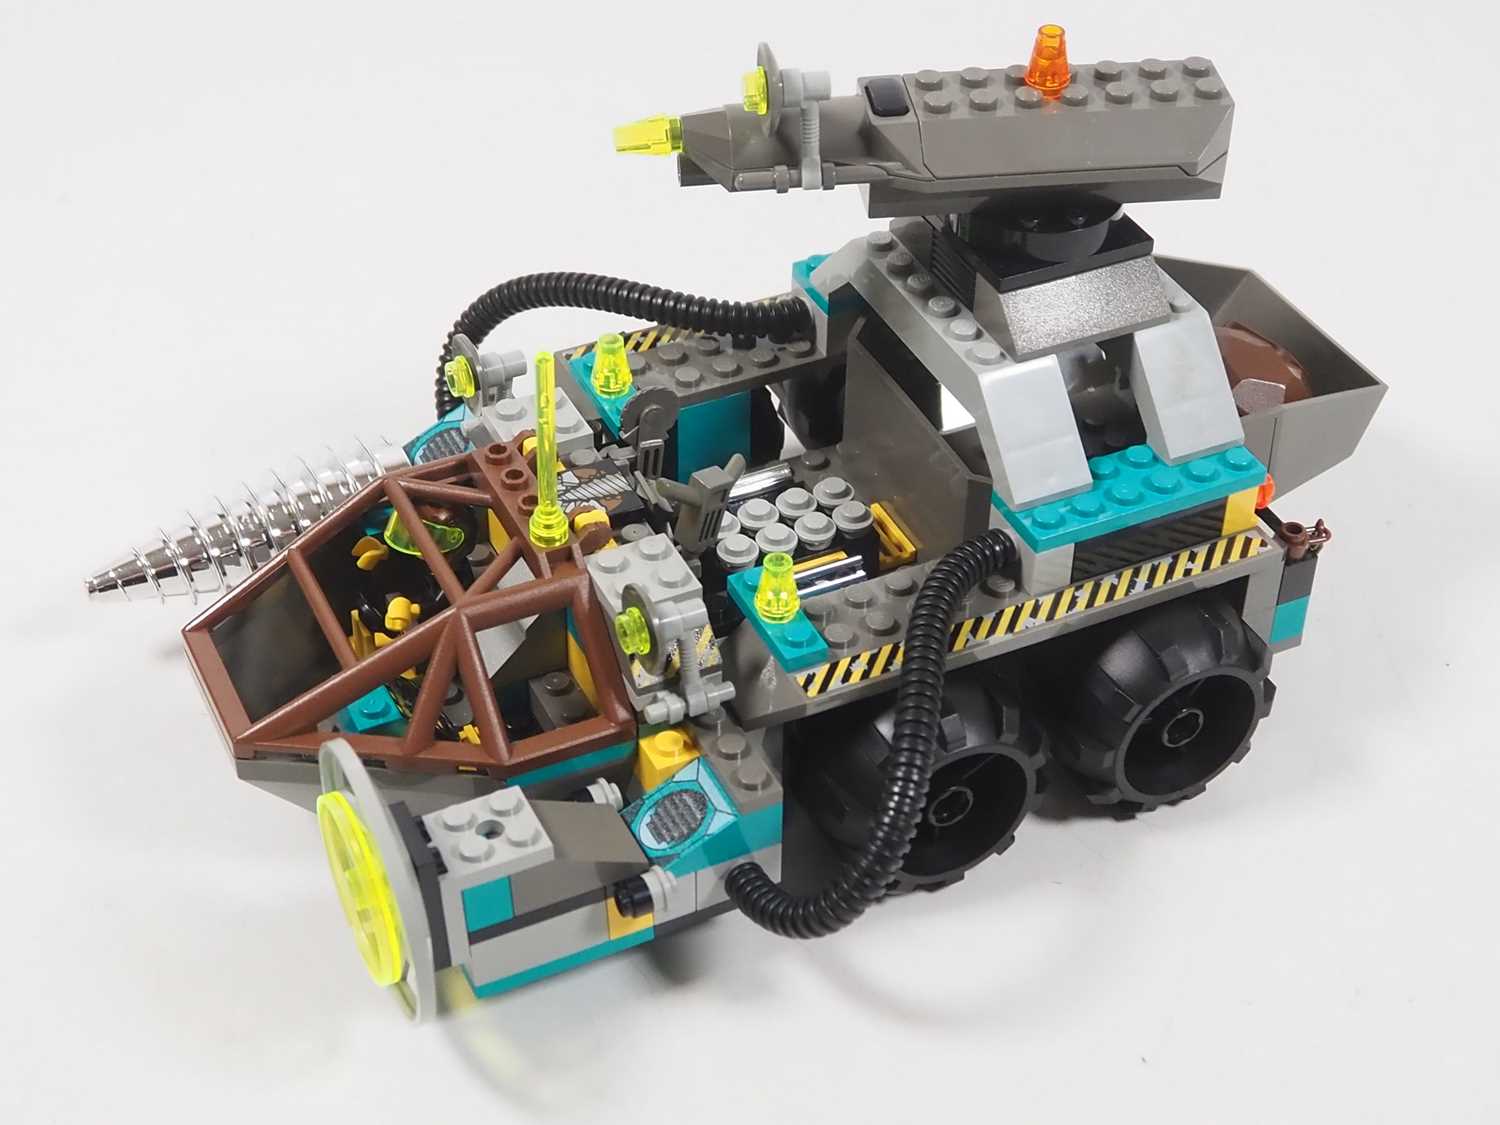 LEGO - ROCK RAIDERS #4970 Chrome Crusher - complete with instructions and picture book, battery - Image 4 of 5